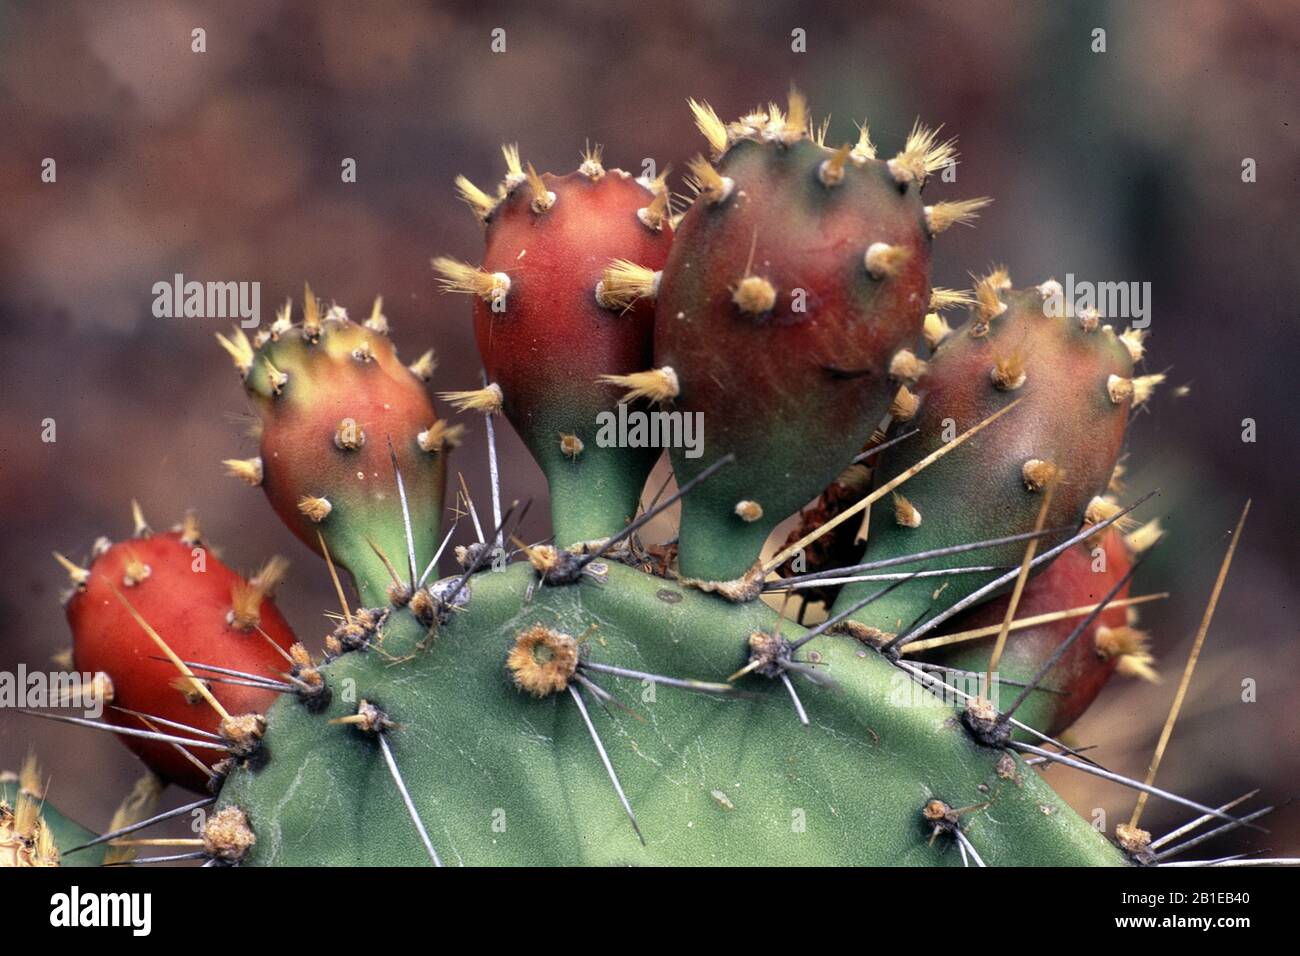 prickly pears (Opuntia wentiana), Prickly pear fruits, Netherlands Antilles, Curacao Stock Photo